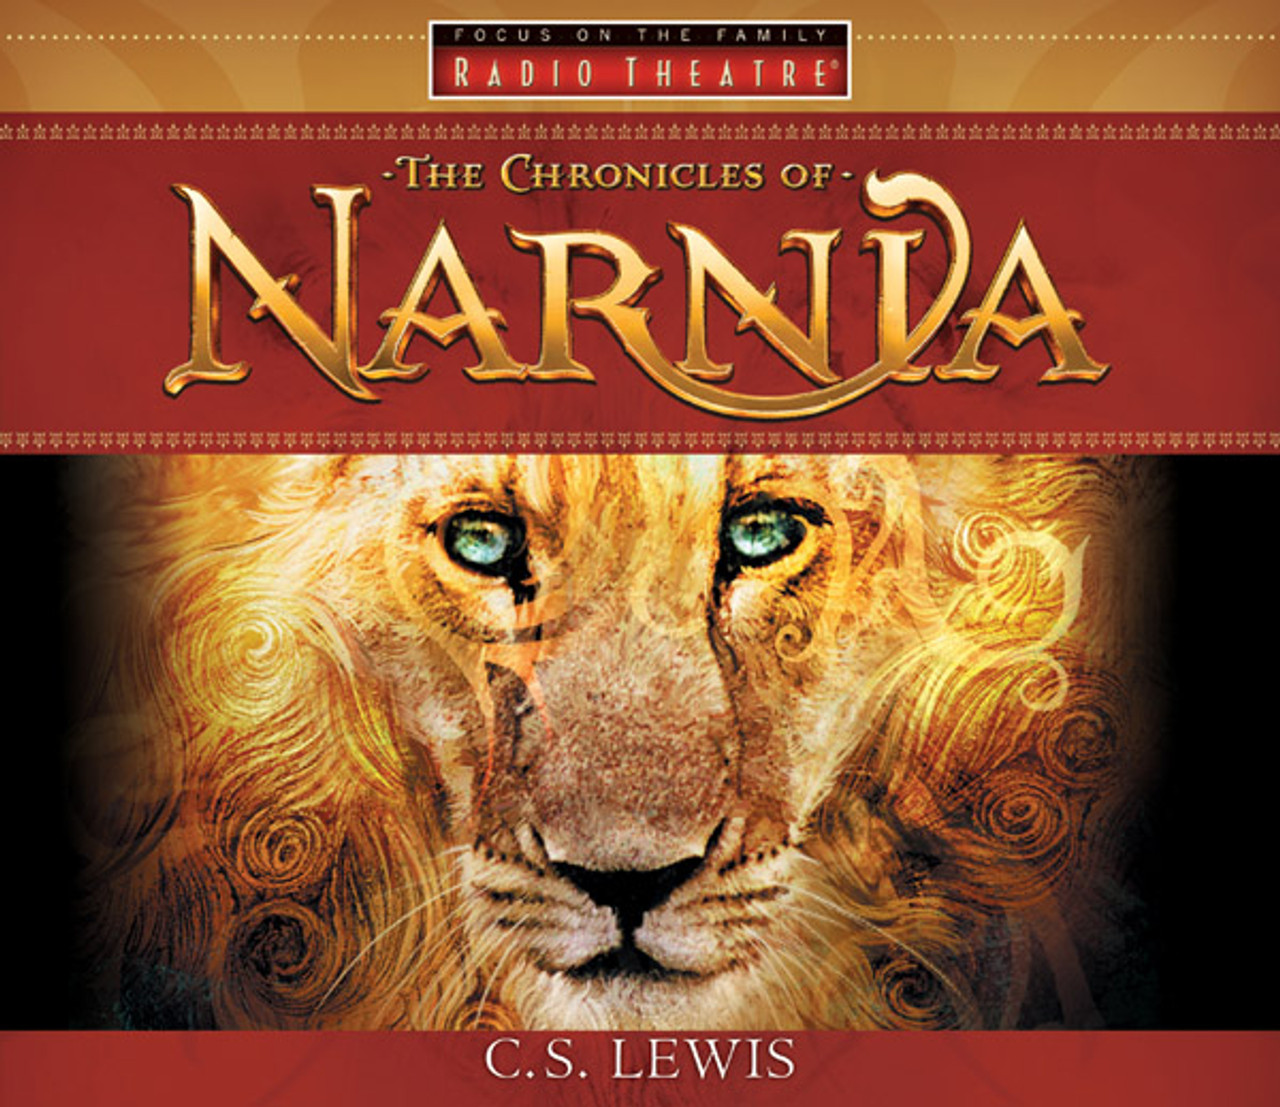 Radio Theatre: The Chronicles of Narnia Complete Set (Digital) - Focus ...